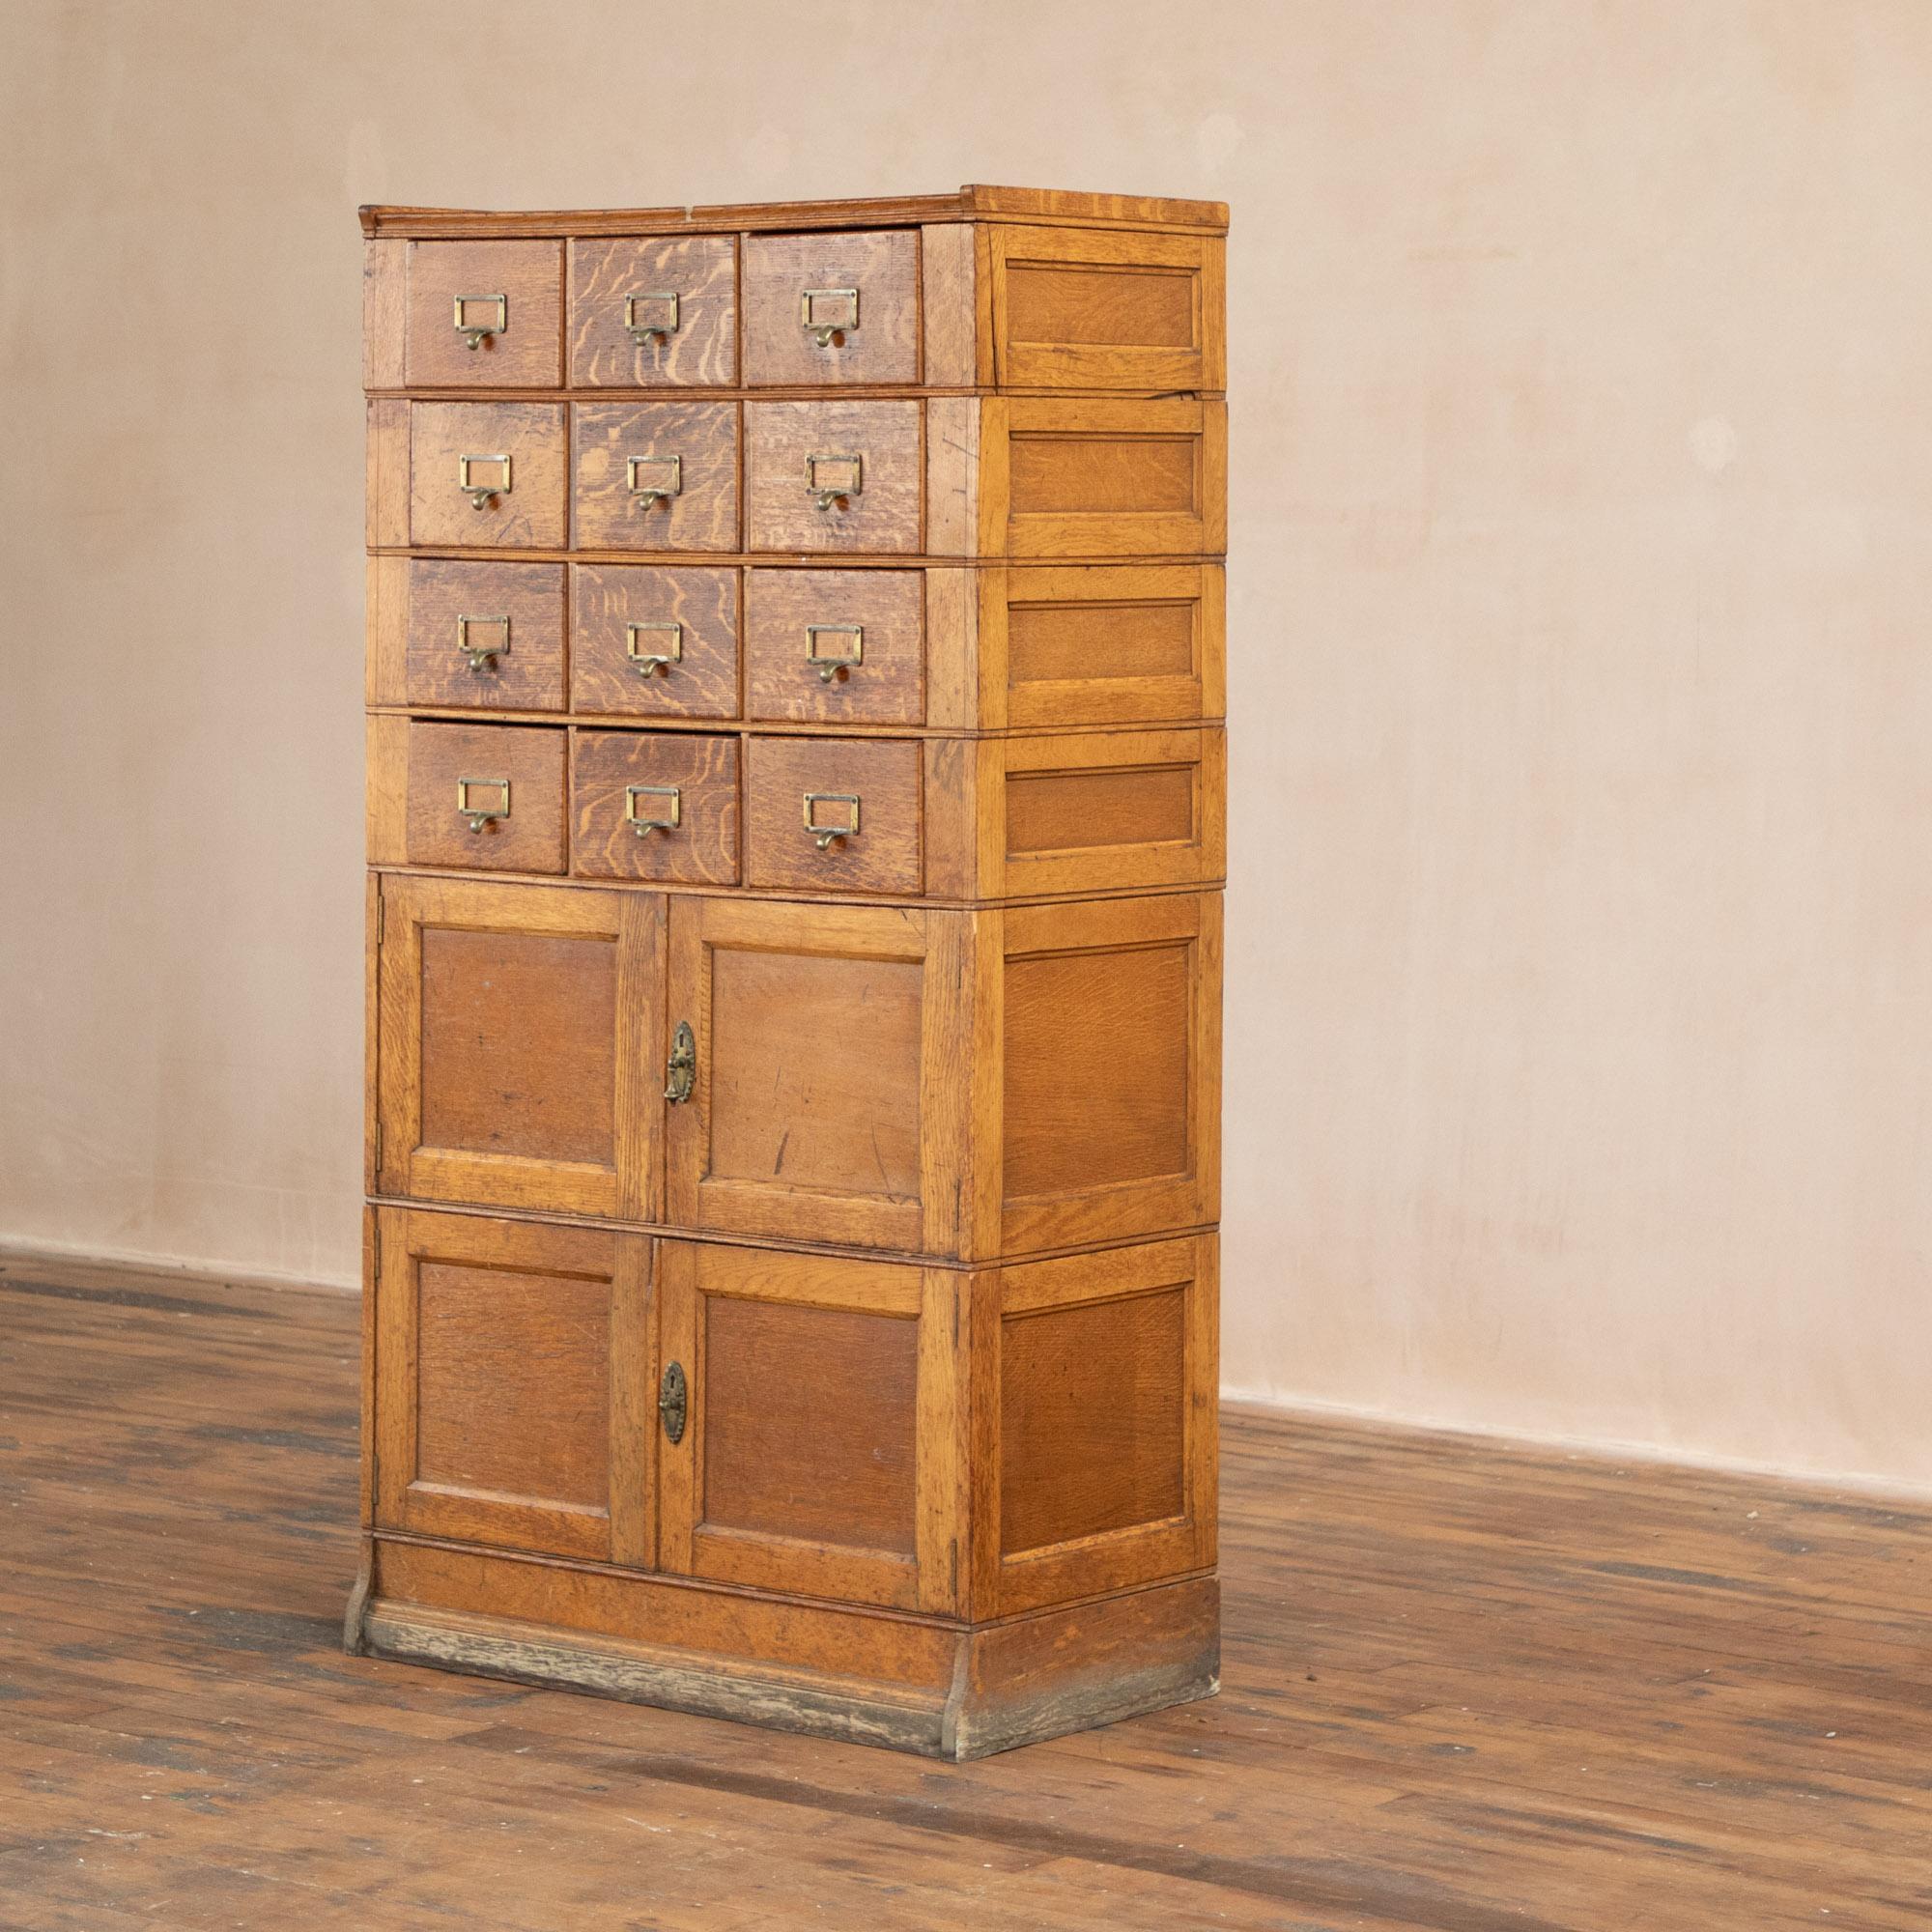 Vintage 1900's oak filling cabinet, haberdashery, apothecary drawers For Sale 8